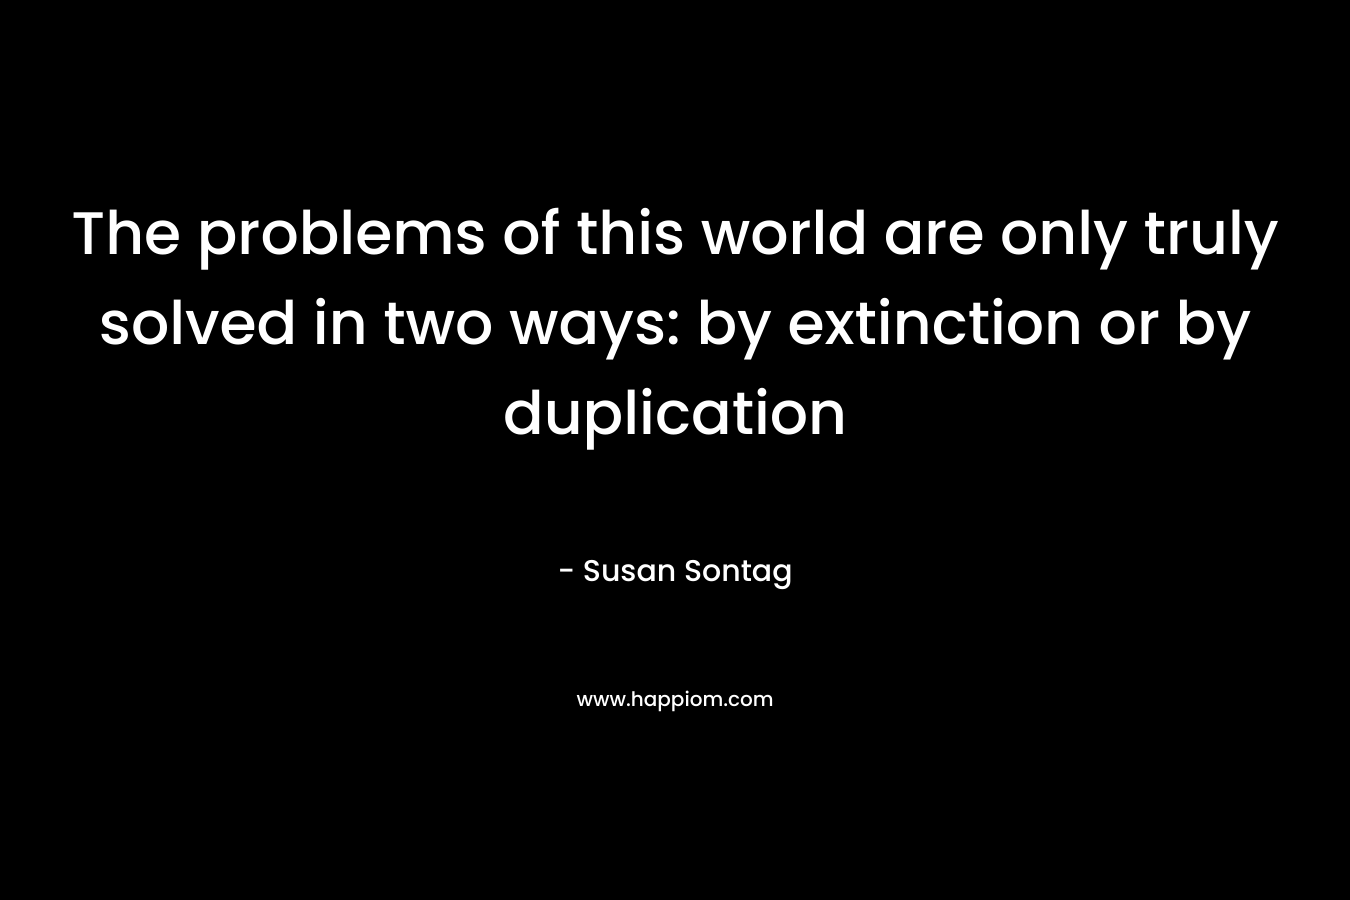 The problems of this world are only truly solved in two ways: by extinction or by duplication – Susan Sontag